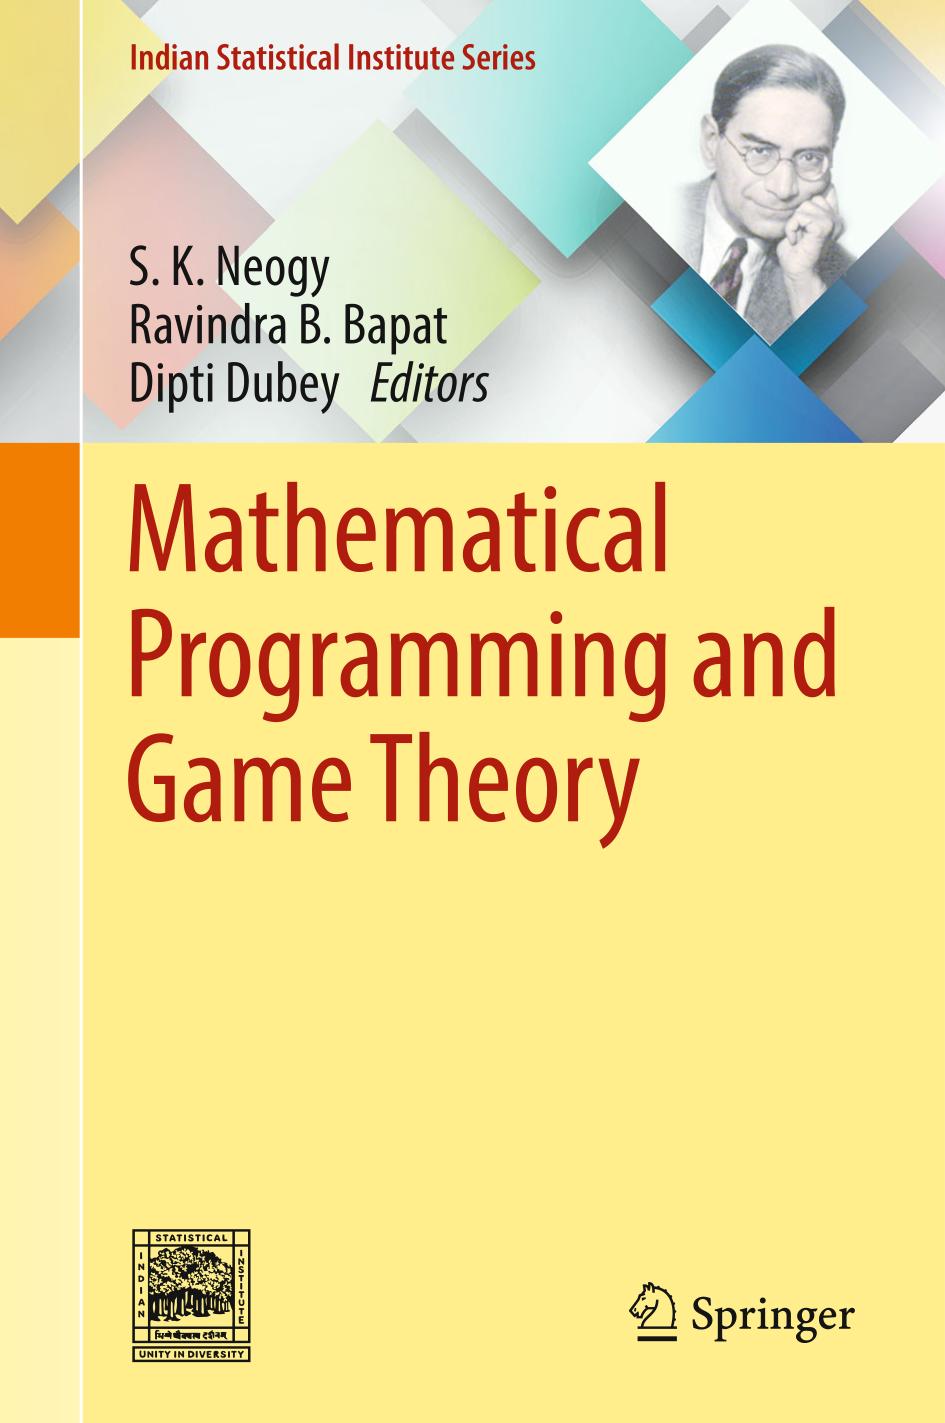 Mathematical Programming and Game Theory.